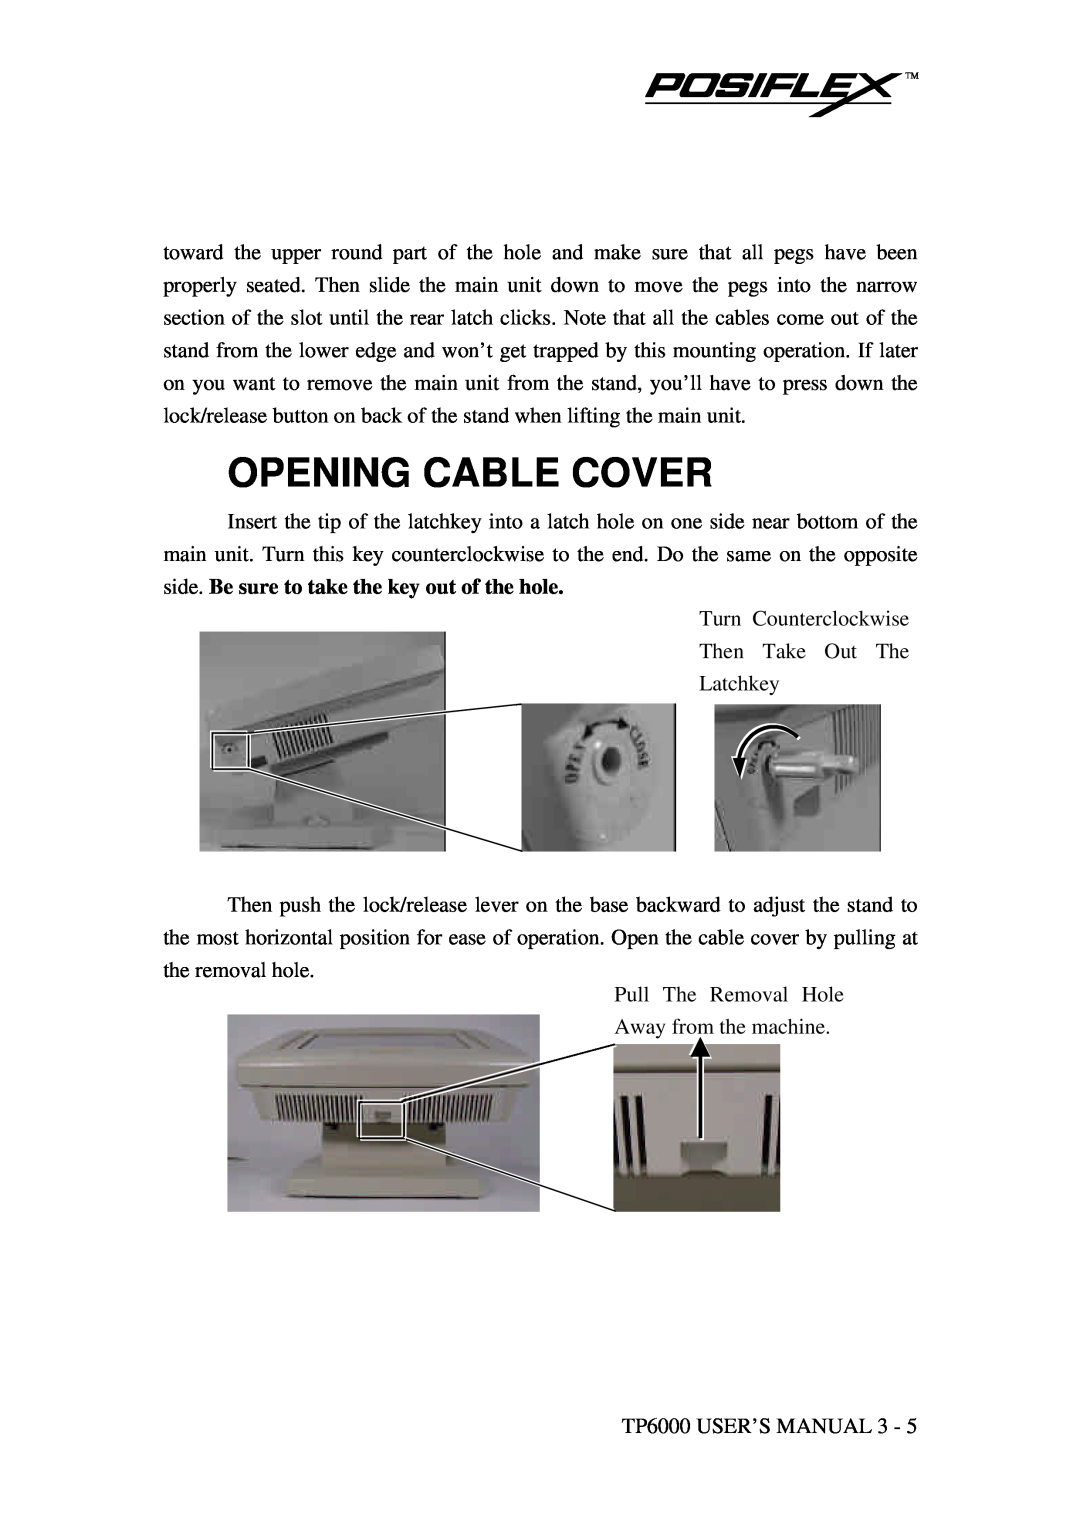 Mustek TP-6000 user manual Opening Cable Cover 